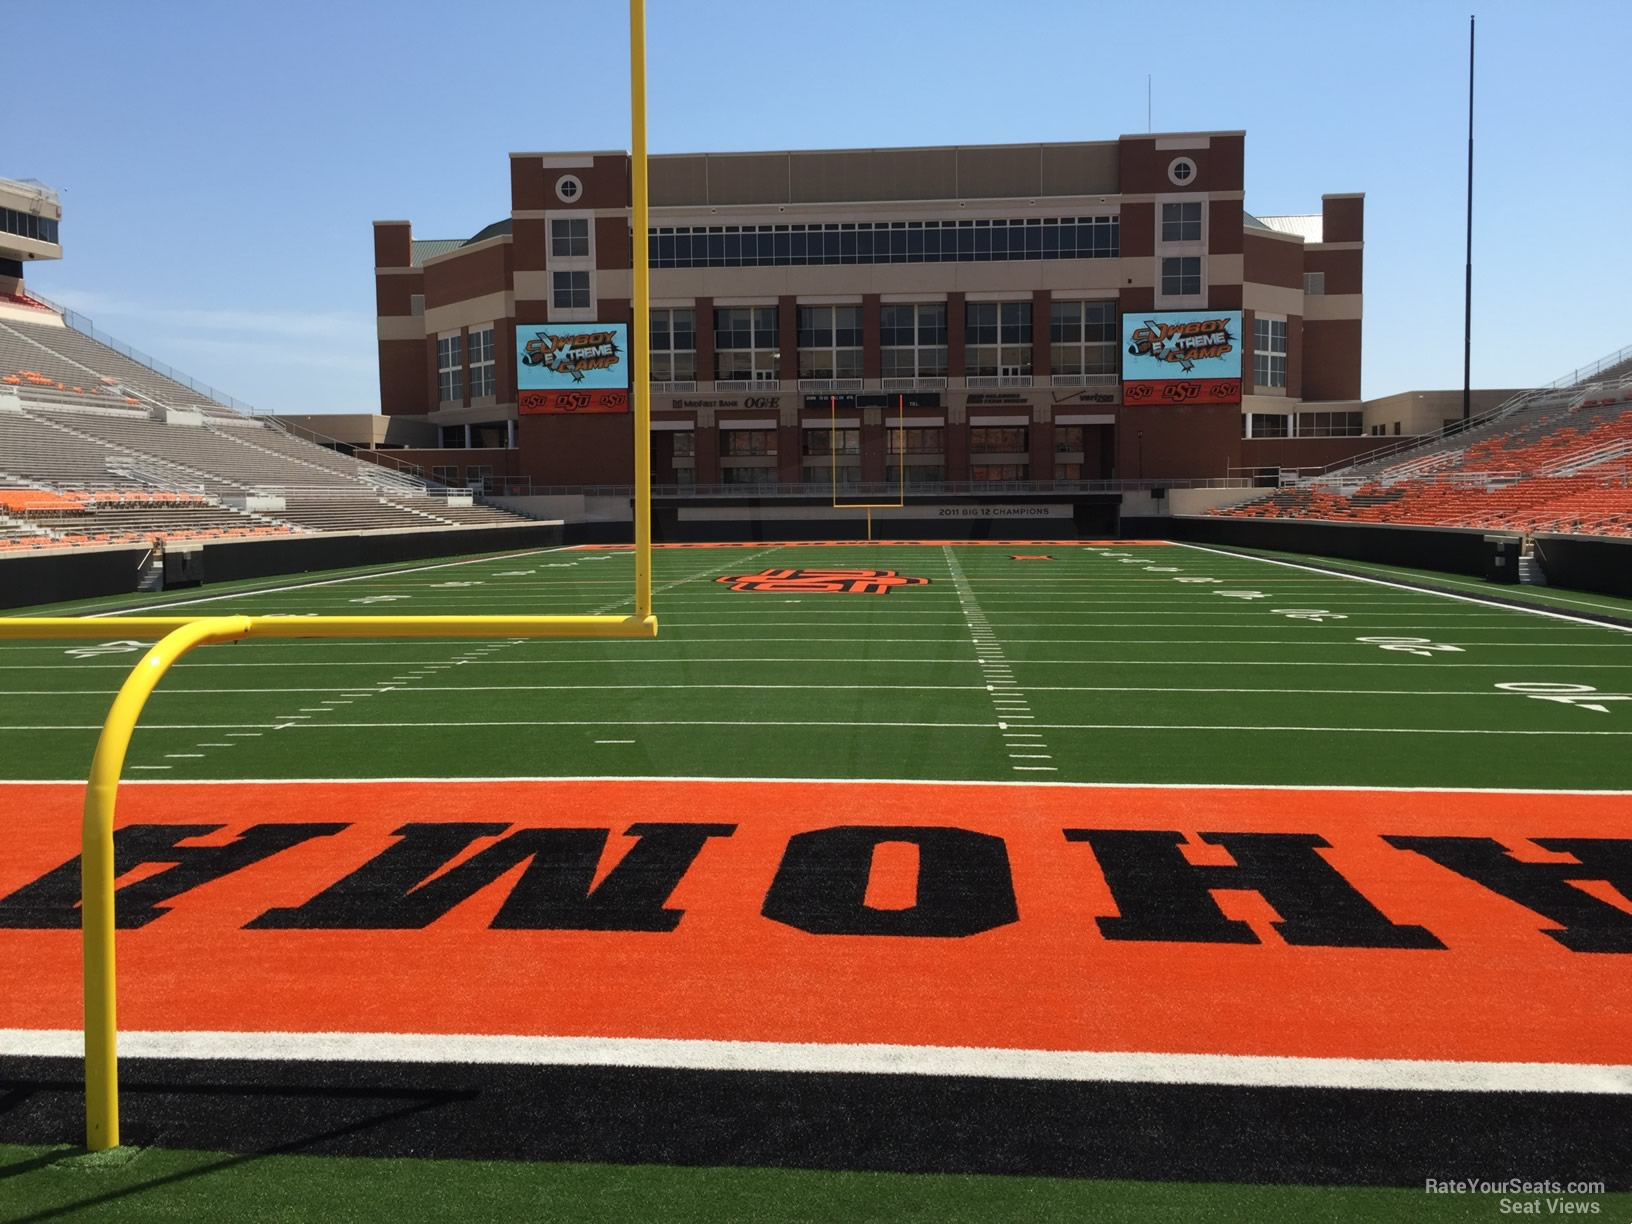 section 111, row 4 seat view  - boone pickens stadium